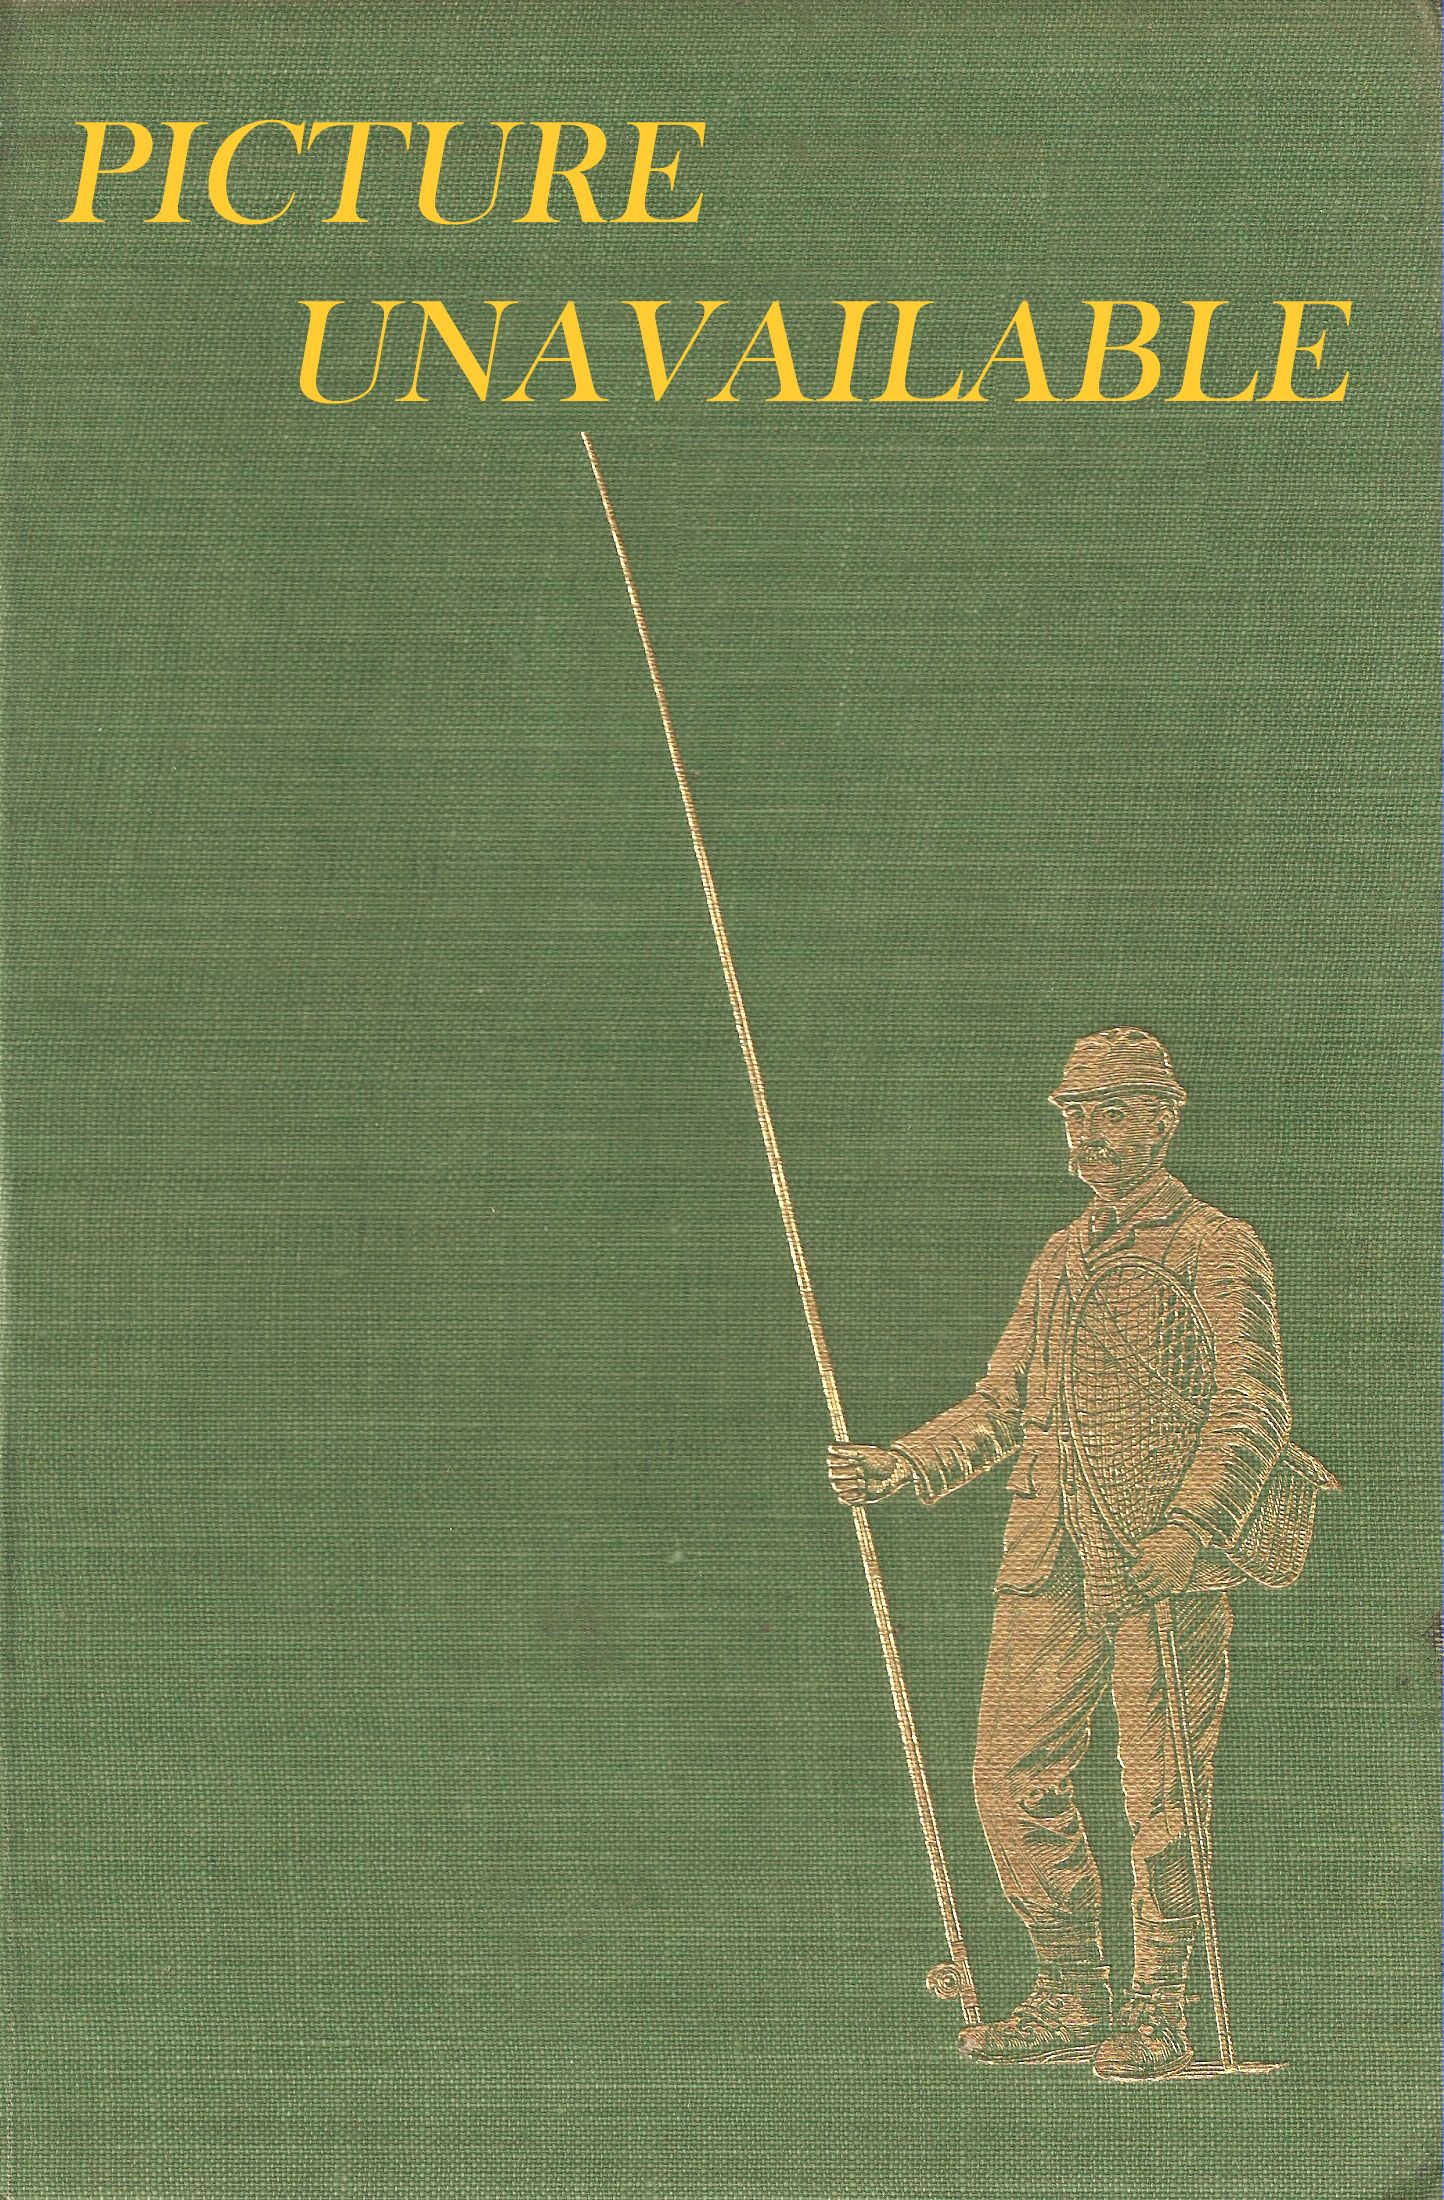 ANGLING BOOKS: A GUIDE FOR COLLECTORS. By Charles Thacher.